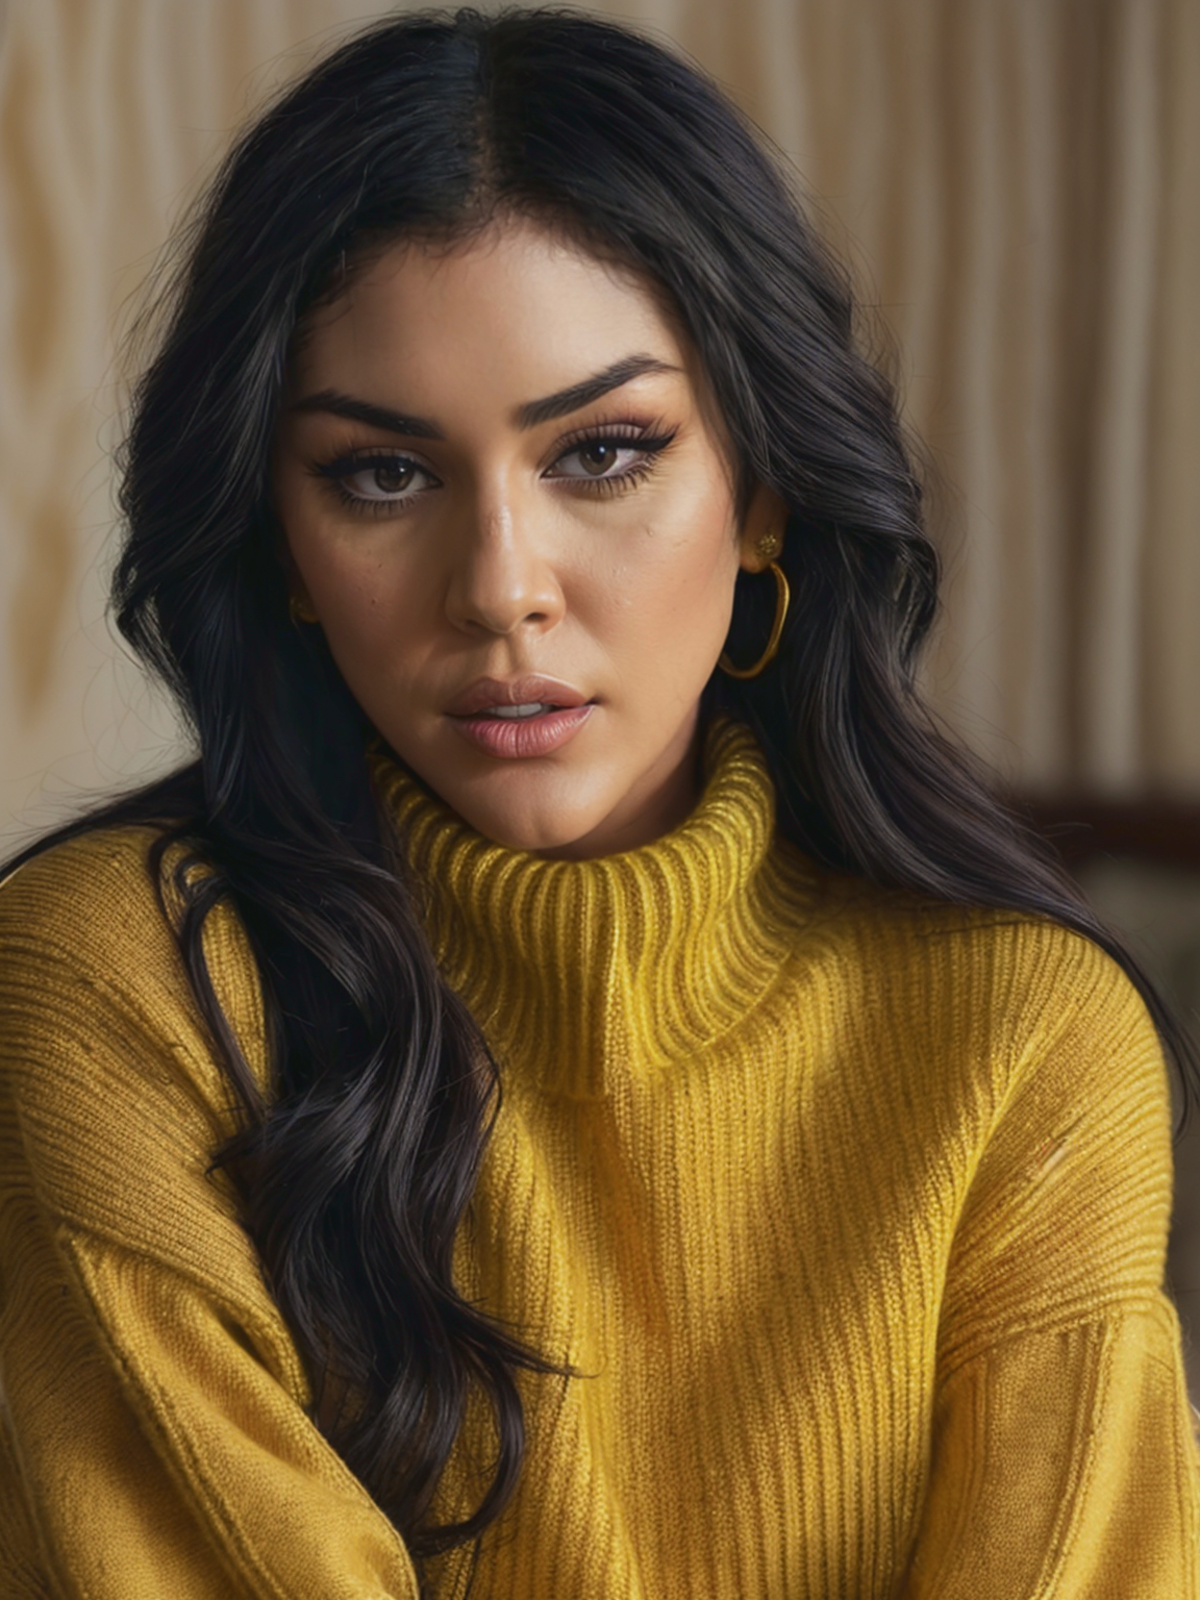 (closeup:1.2!), quesat, a photo of an extremely sexy woman with long flowing hair, (wearing knitted yellow turtleneck swea...